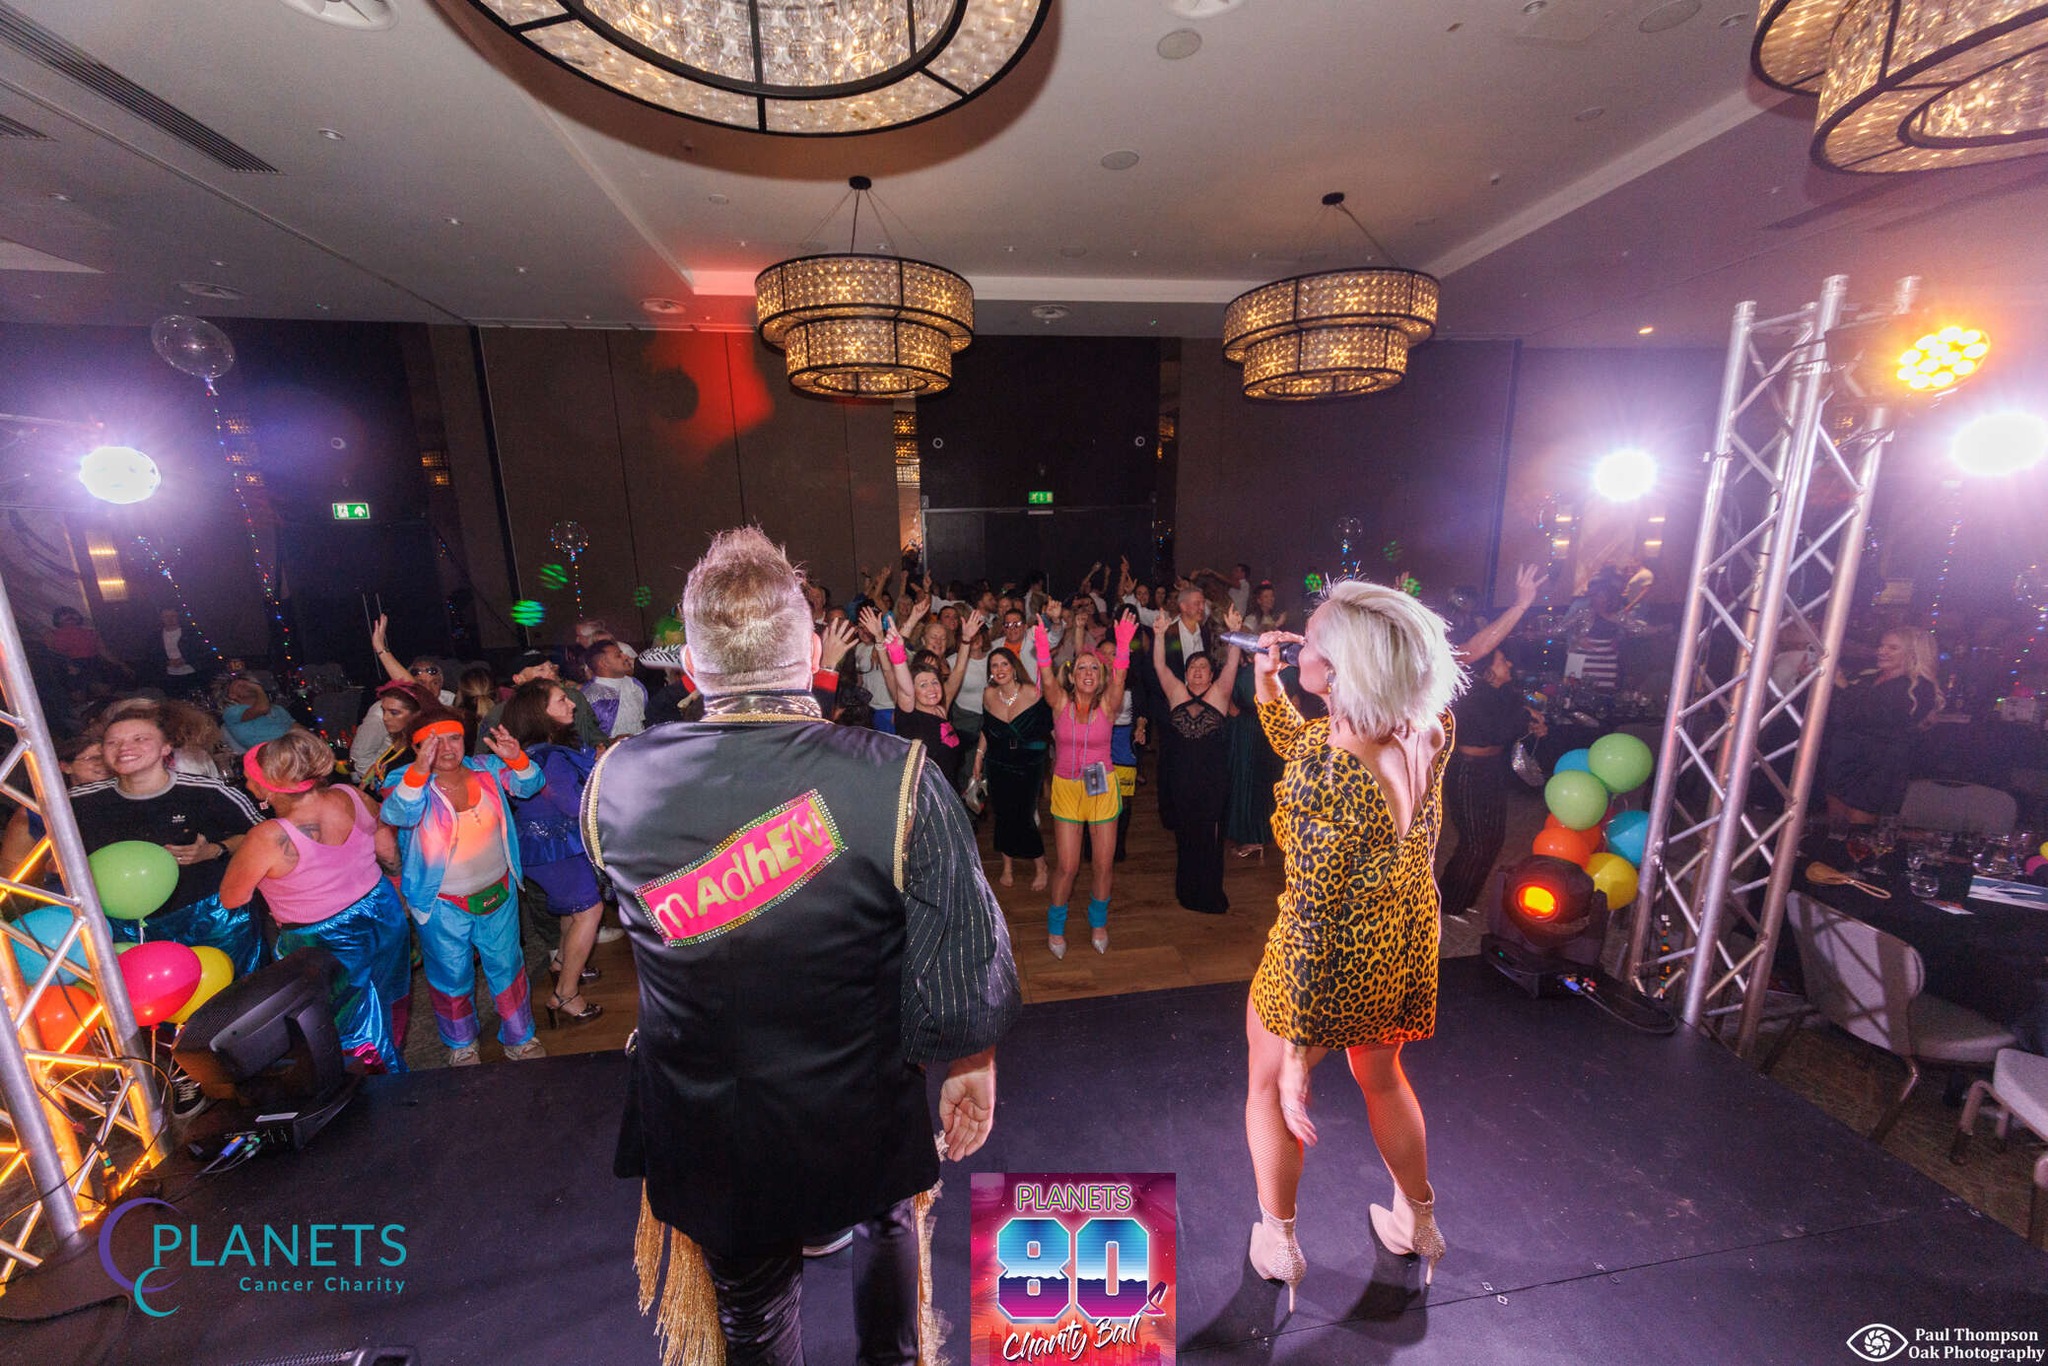 Phttps://planetscharity.org/event/eighties-planets-ball/LANETS Charity 80s Ball